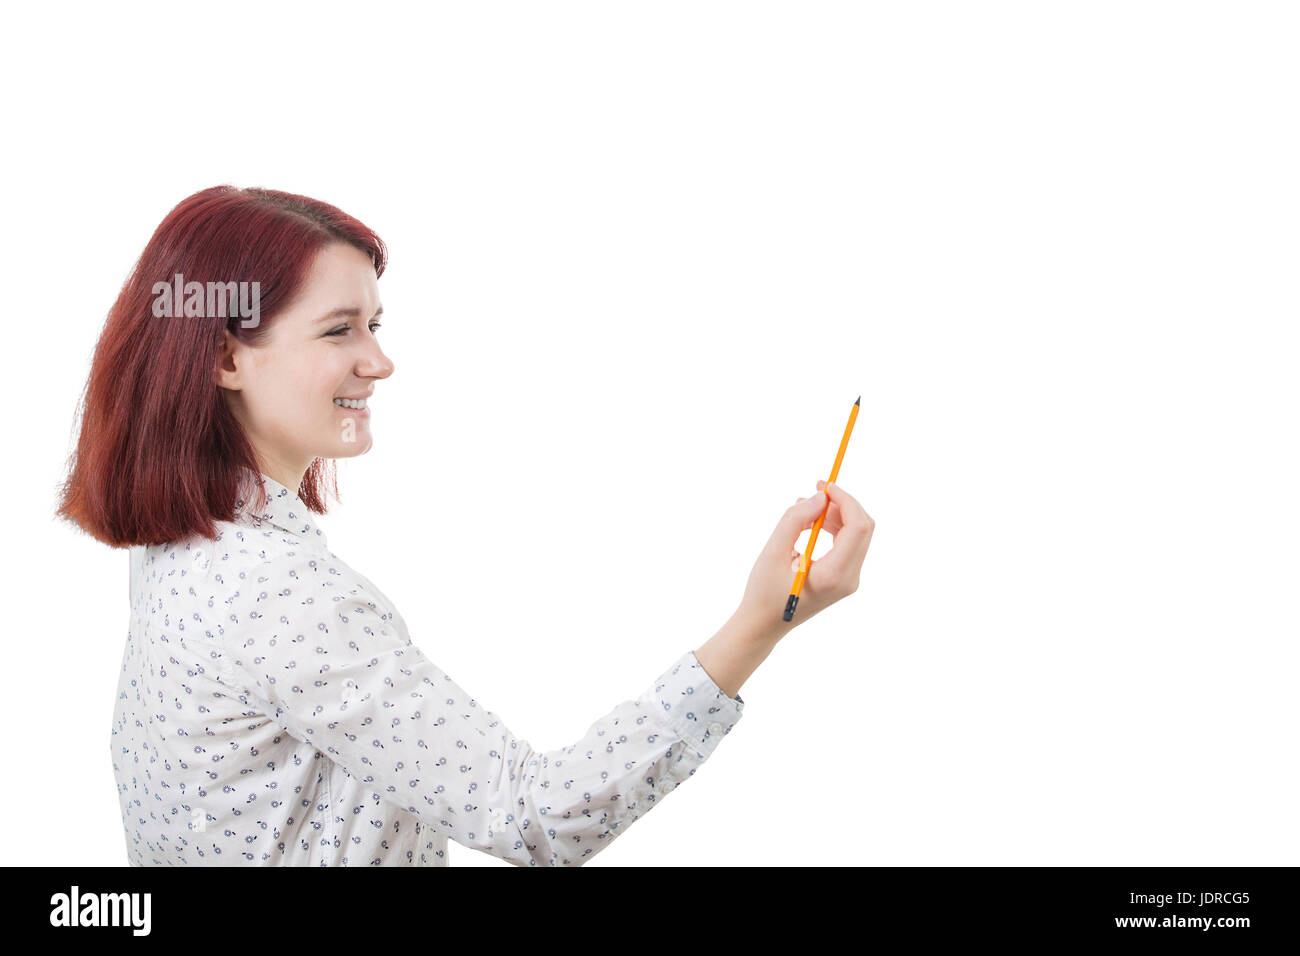 Smiling young student woman holding a pencil trying to develop her potential.Creativity concept. Stock Photo